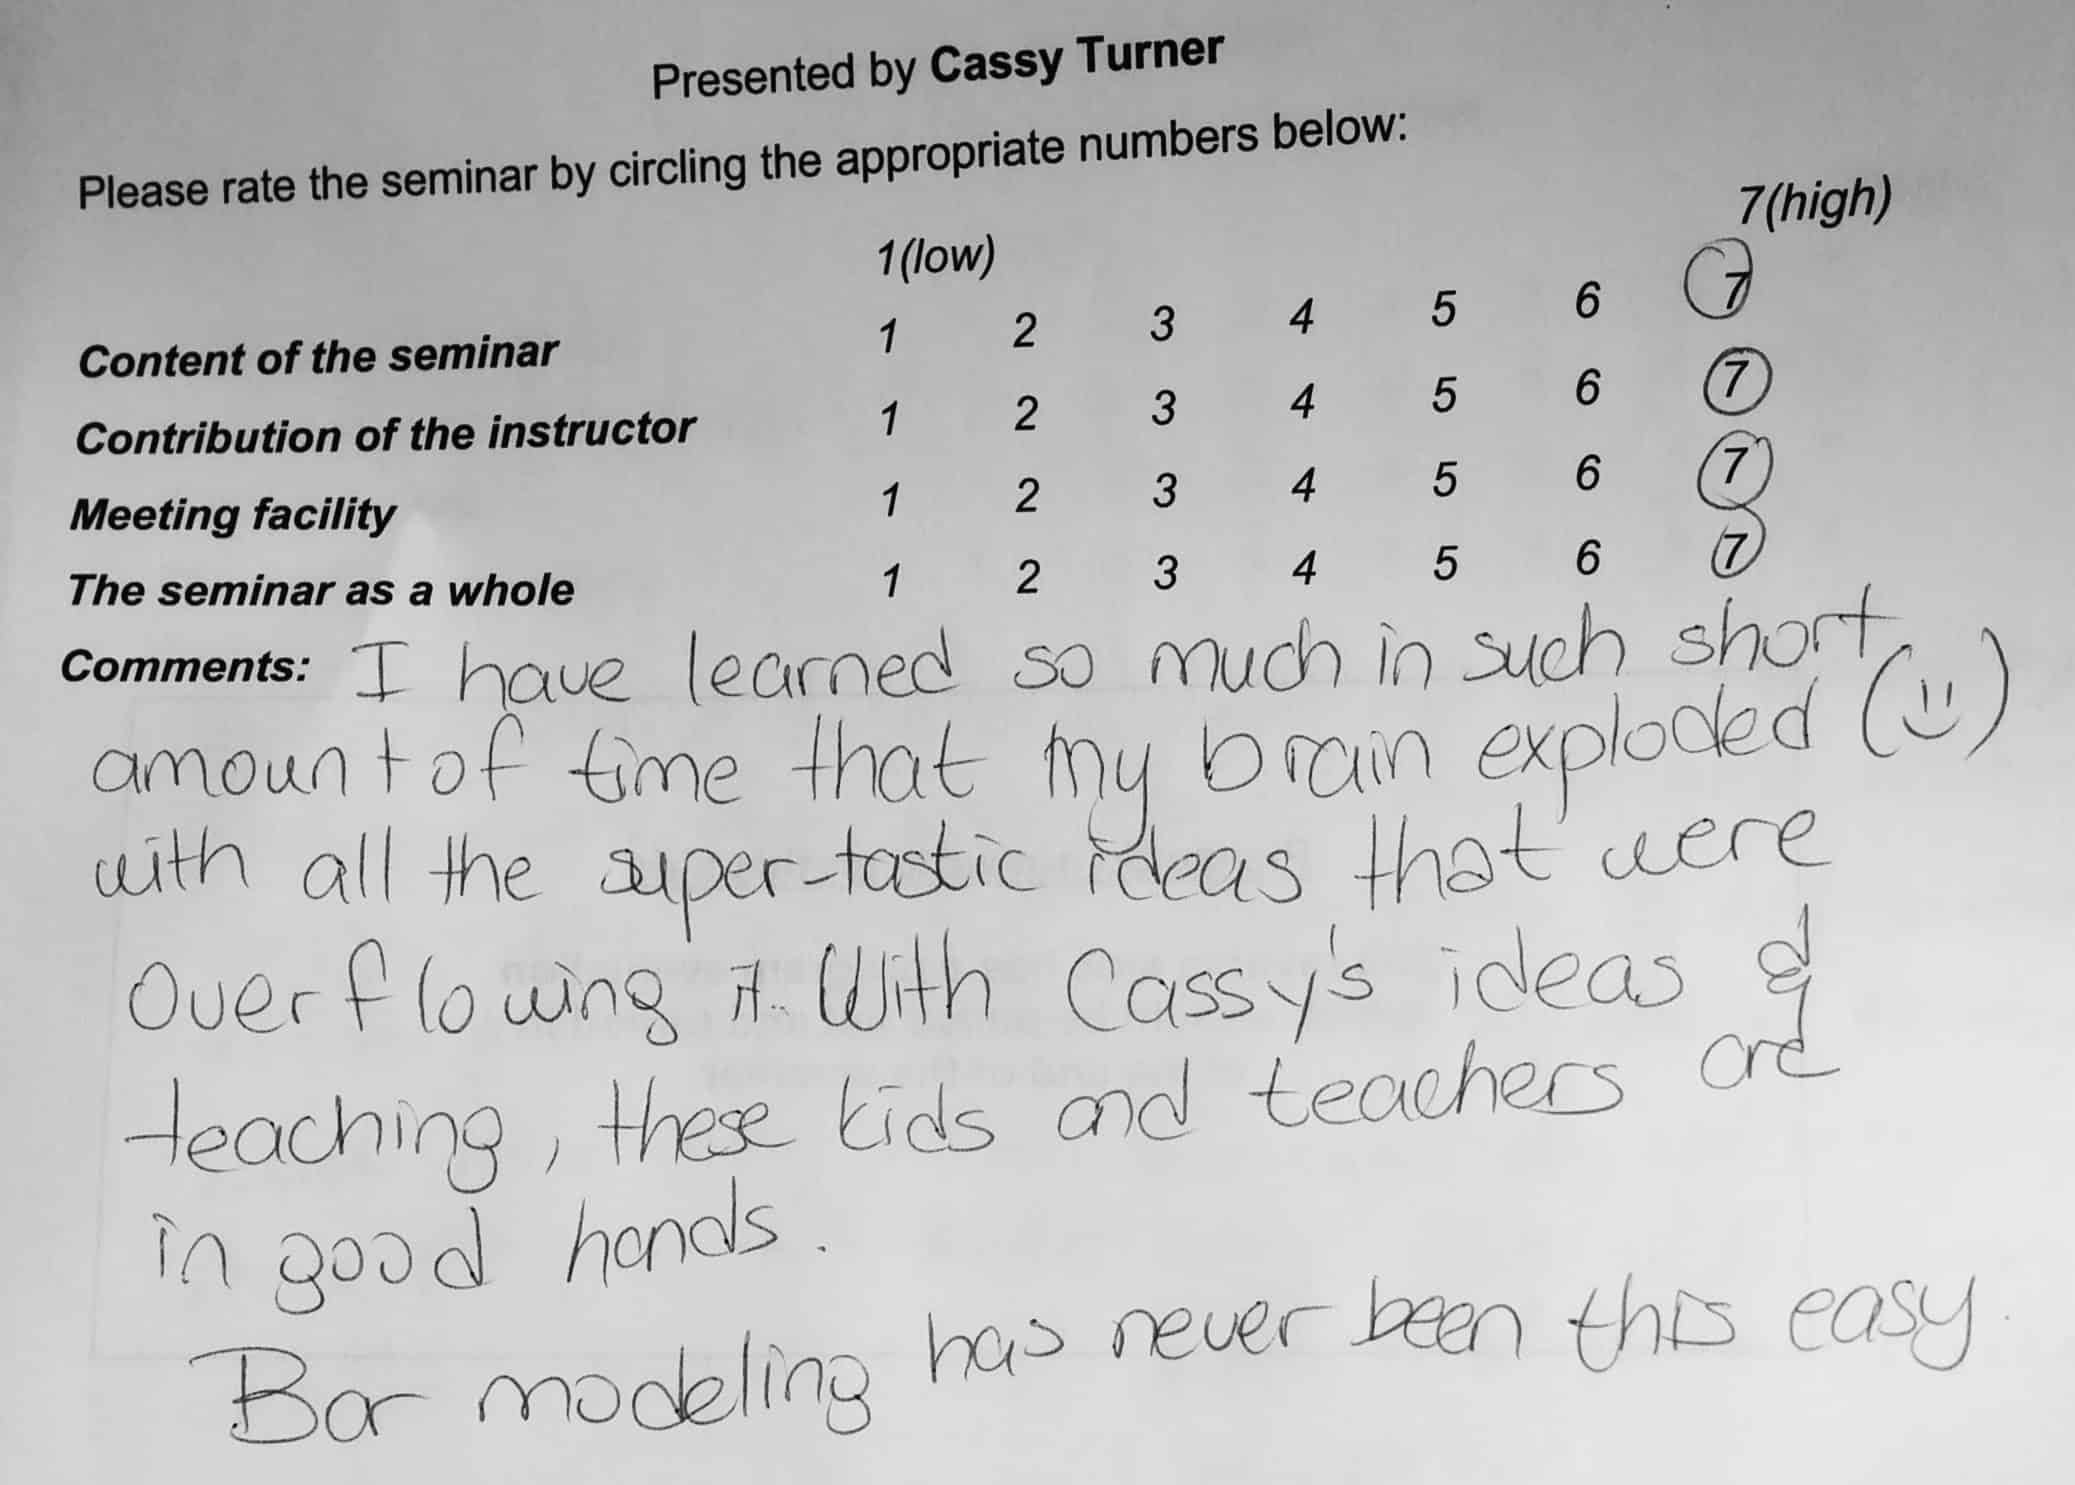 One of my favorite evaluations from 2014